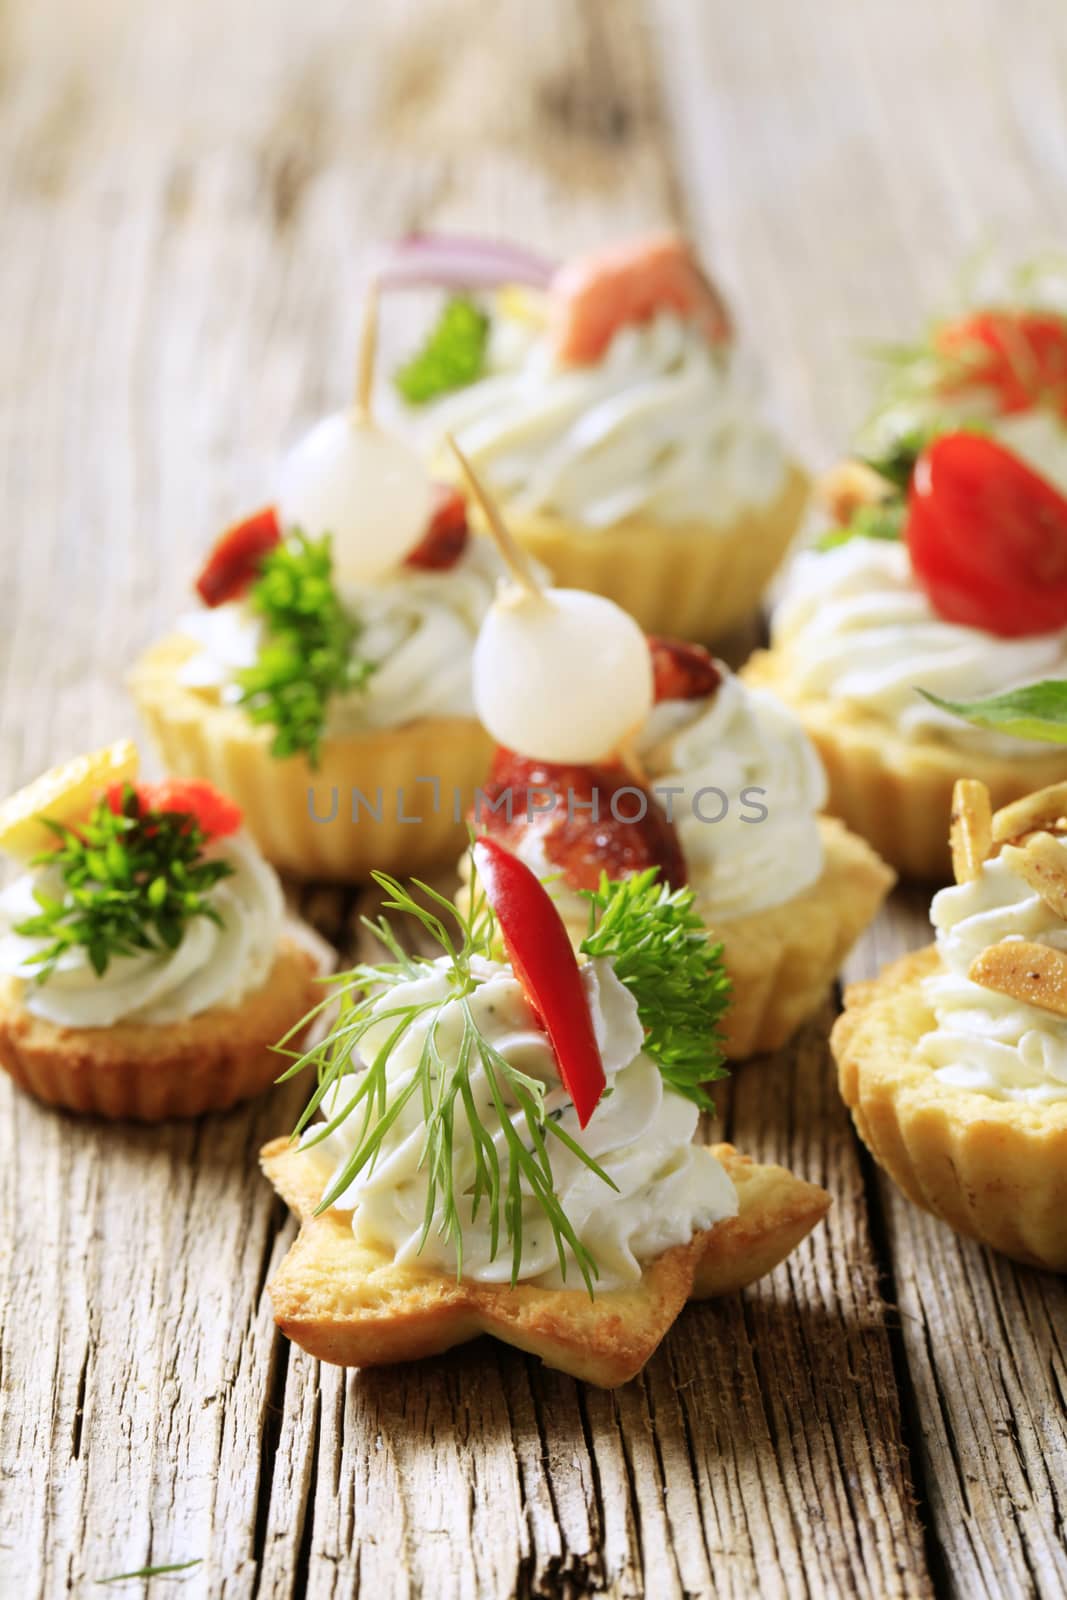 Variety of canapes by Digifoodstock